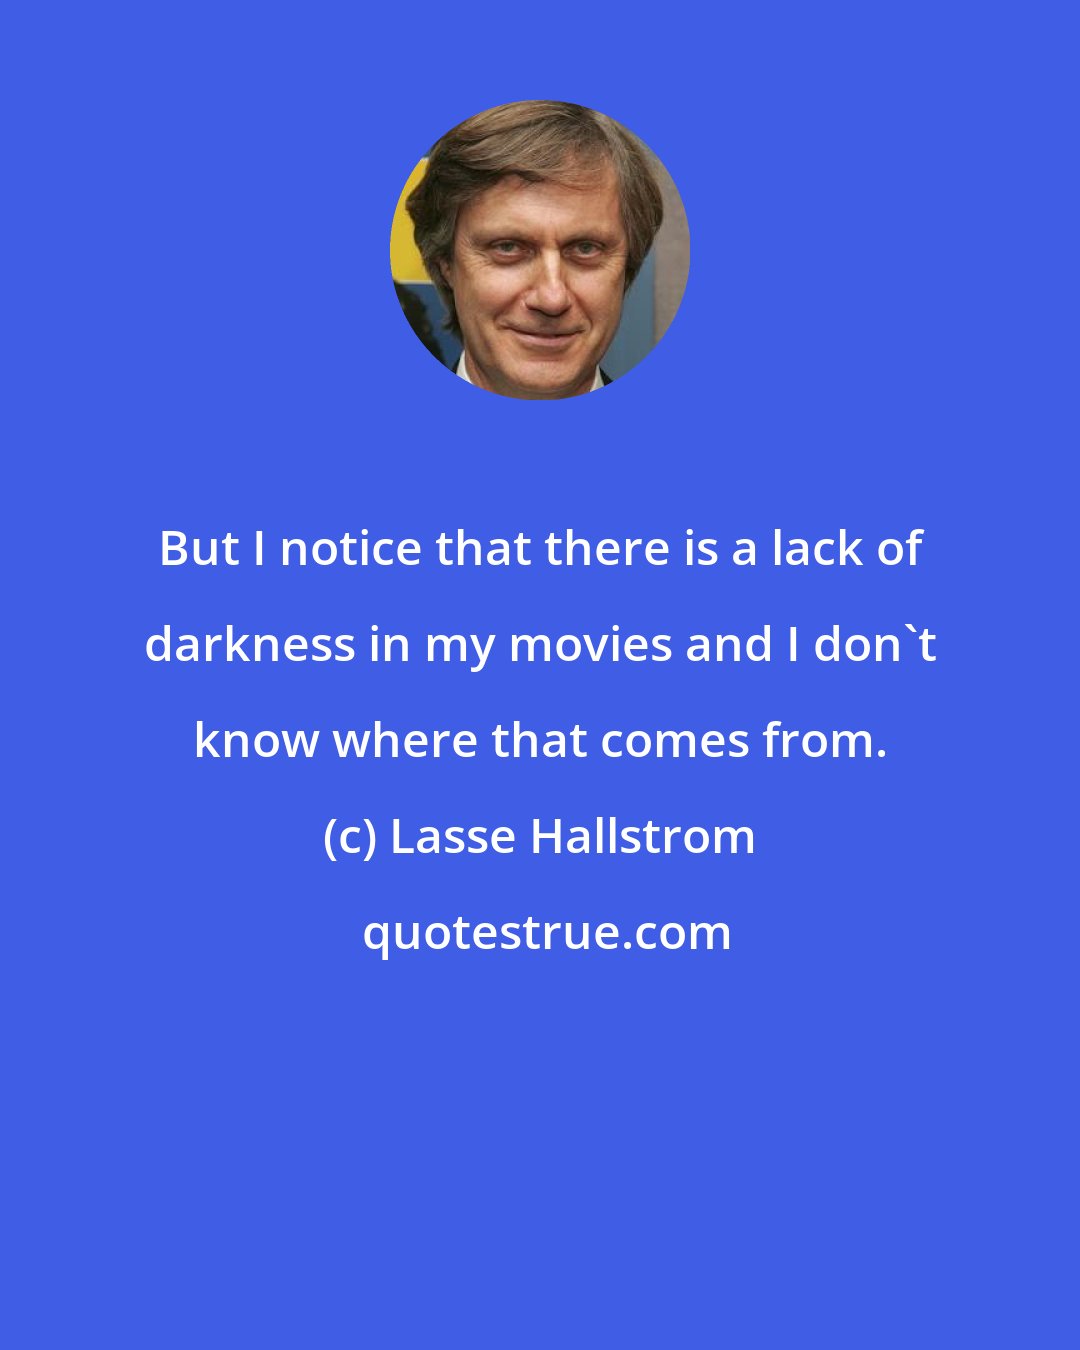 Lasse Hallstrom: But I notice that there is a lack of darkness in my movies and I don't know where that comes from.